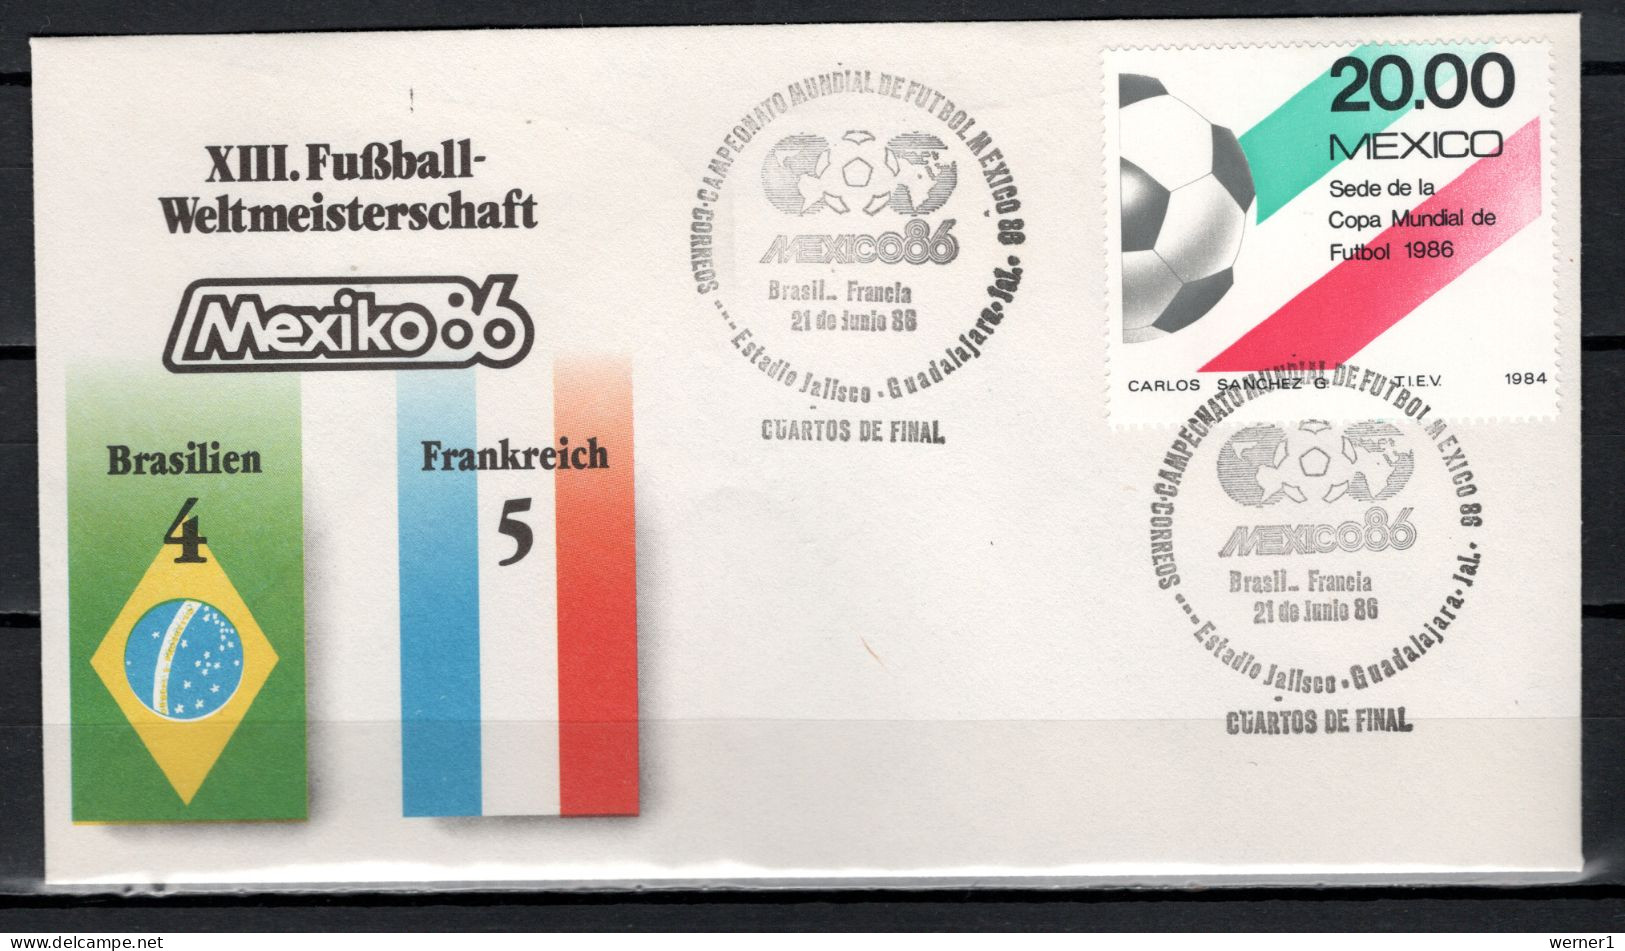 Mexico 1986 Football Soccer World Cup Commemorative Cover Match Brazil - France 4 : 5 - 1986 – Messico